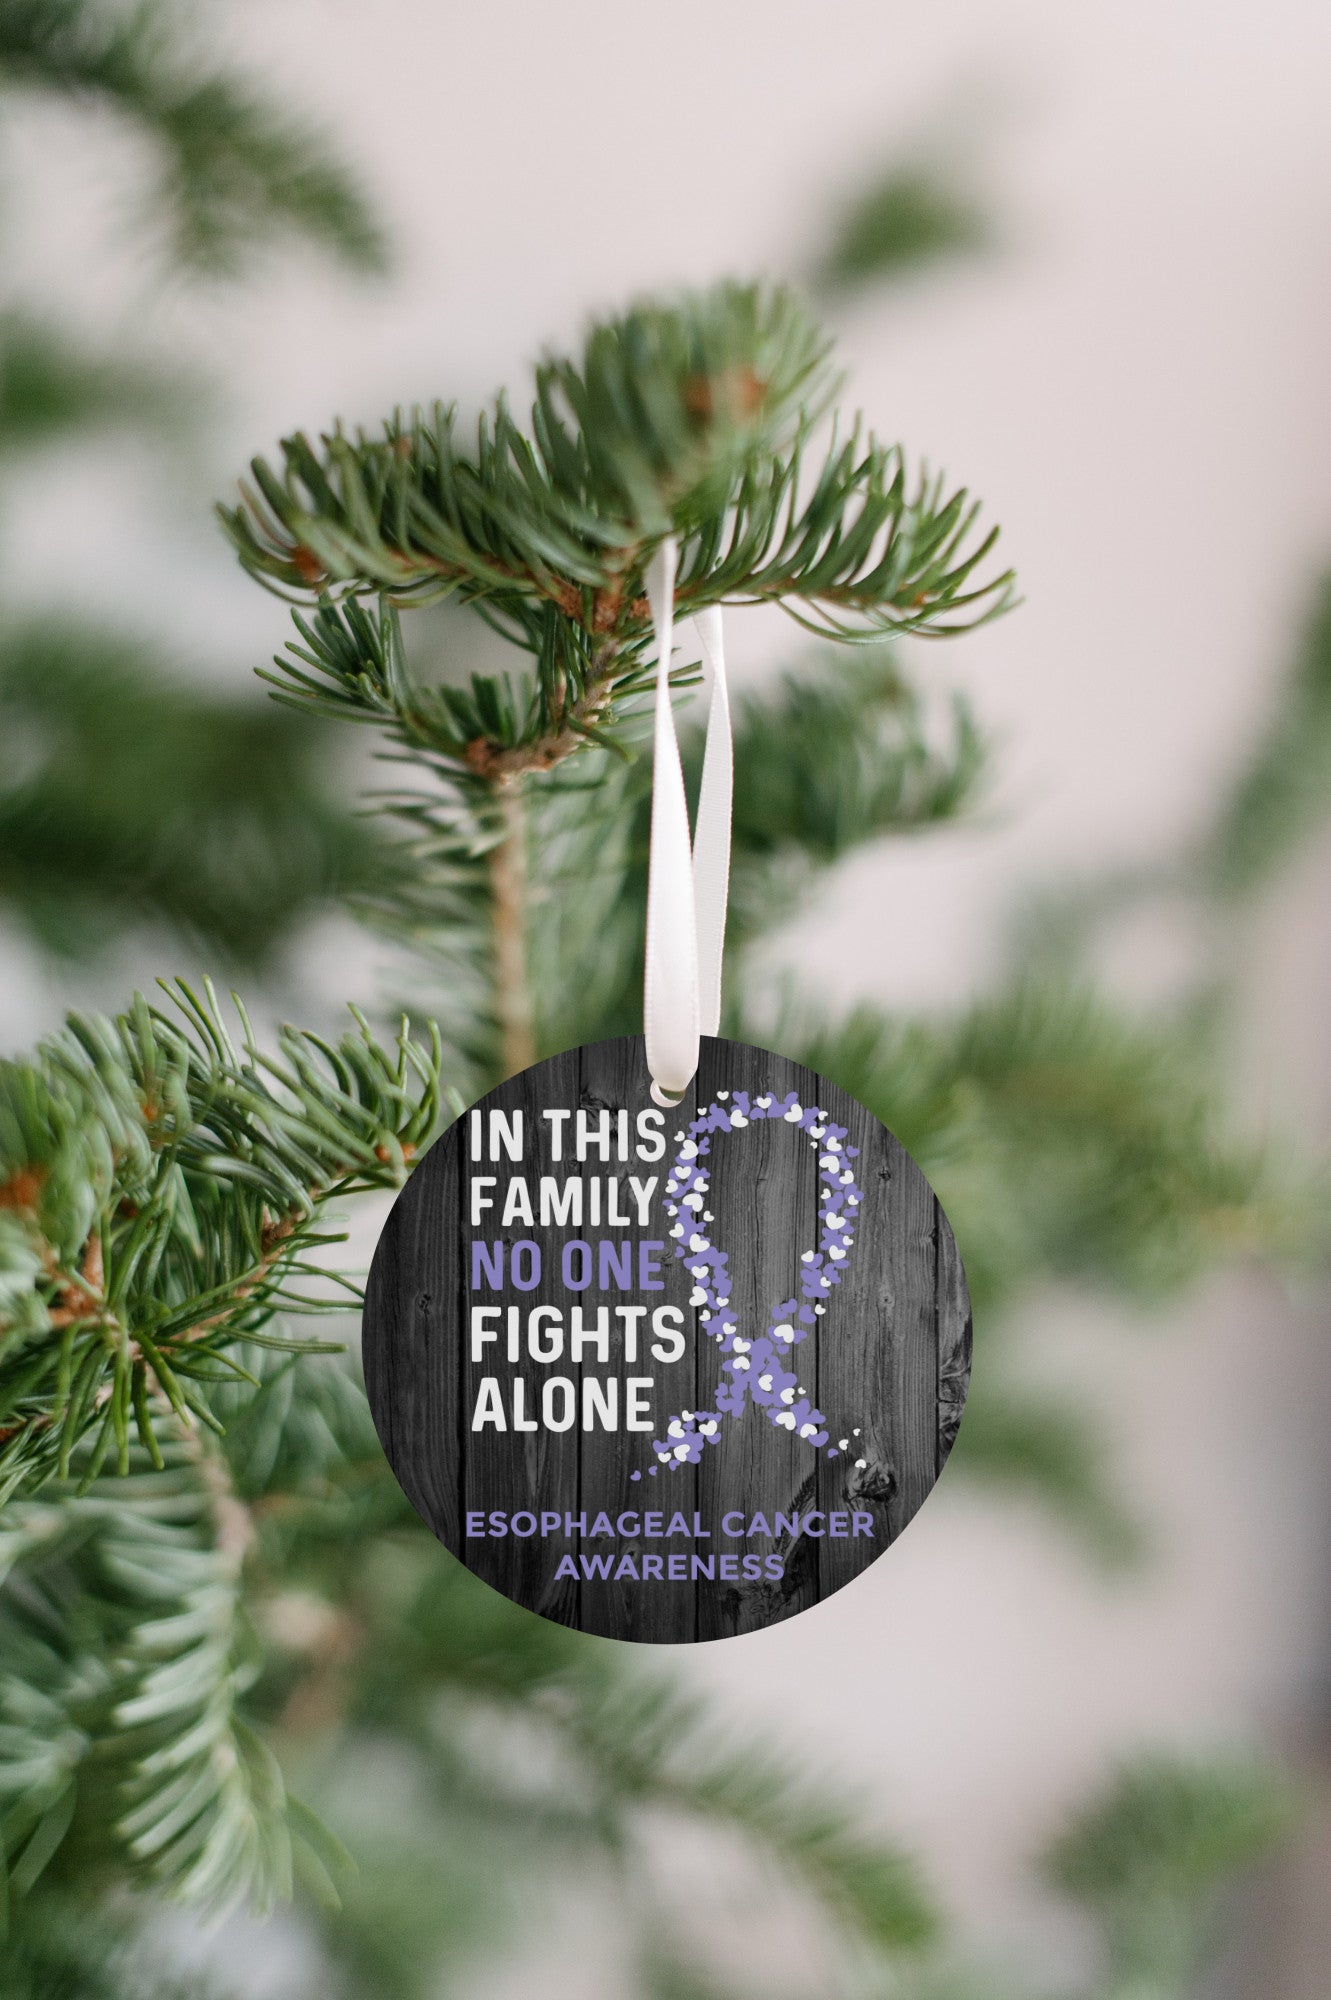 Esophageal Cancer Awareness Ornament